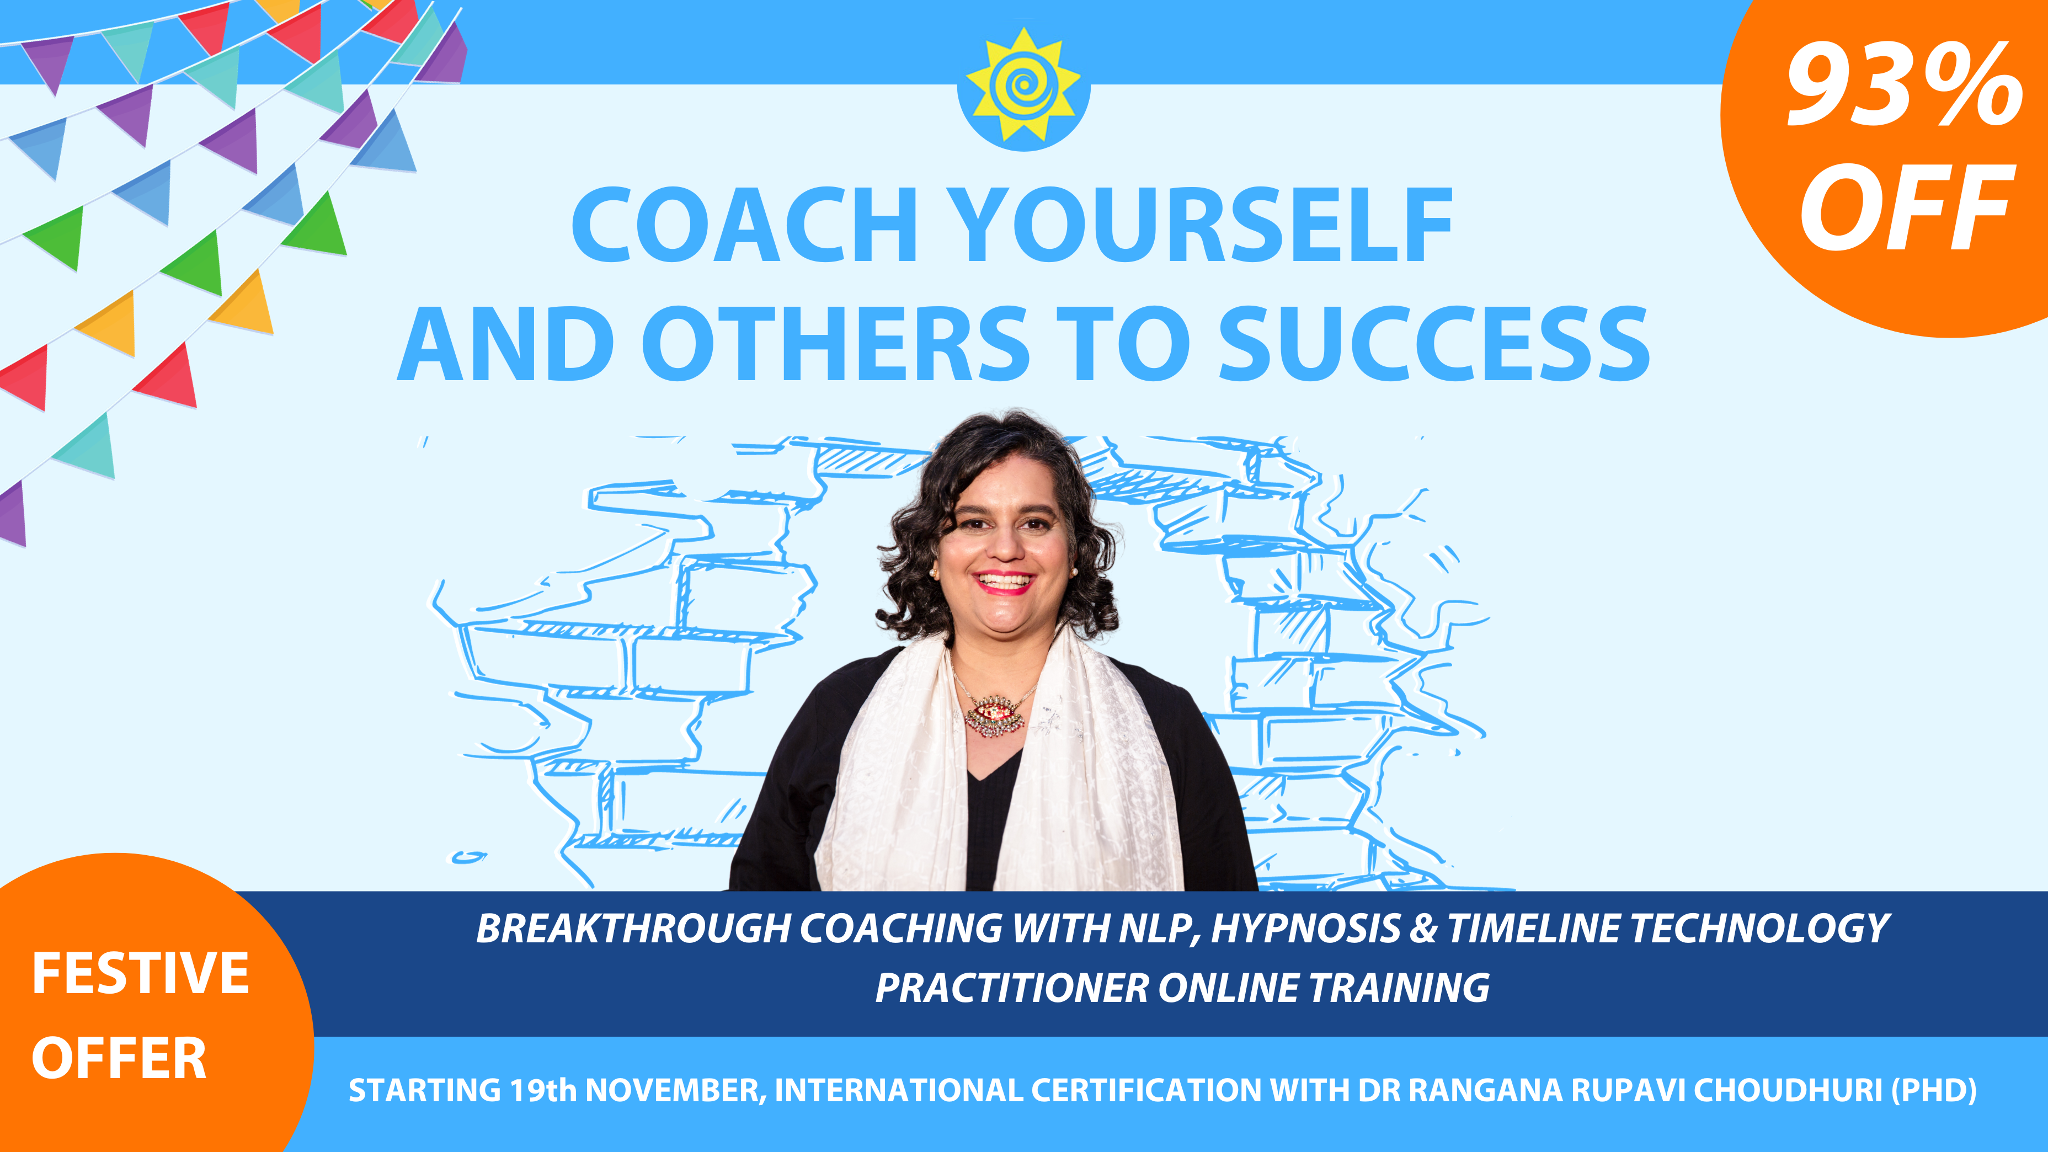 FESTIVAL OFFER - 93% OFF on Breakthrough Coaching, NLP, Hypnosis & Timeline Technology Certification Program with Dr Rangana Rupavi Choudhuri (PhD), Online Event